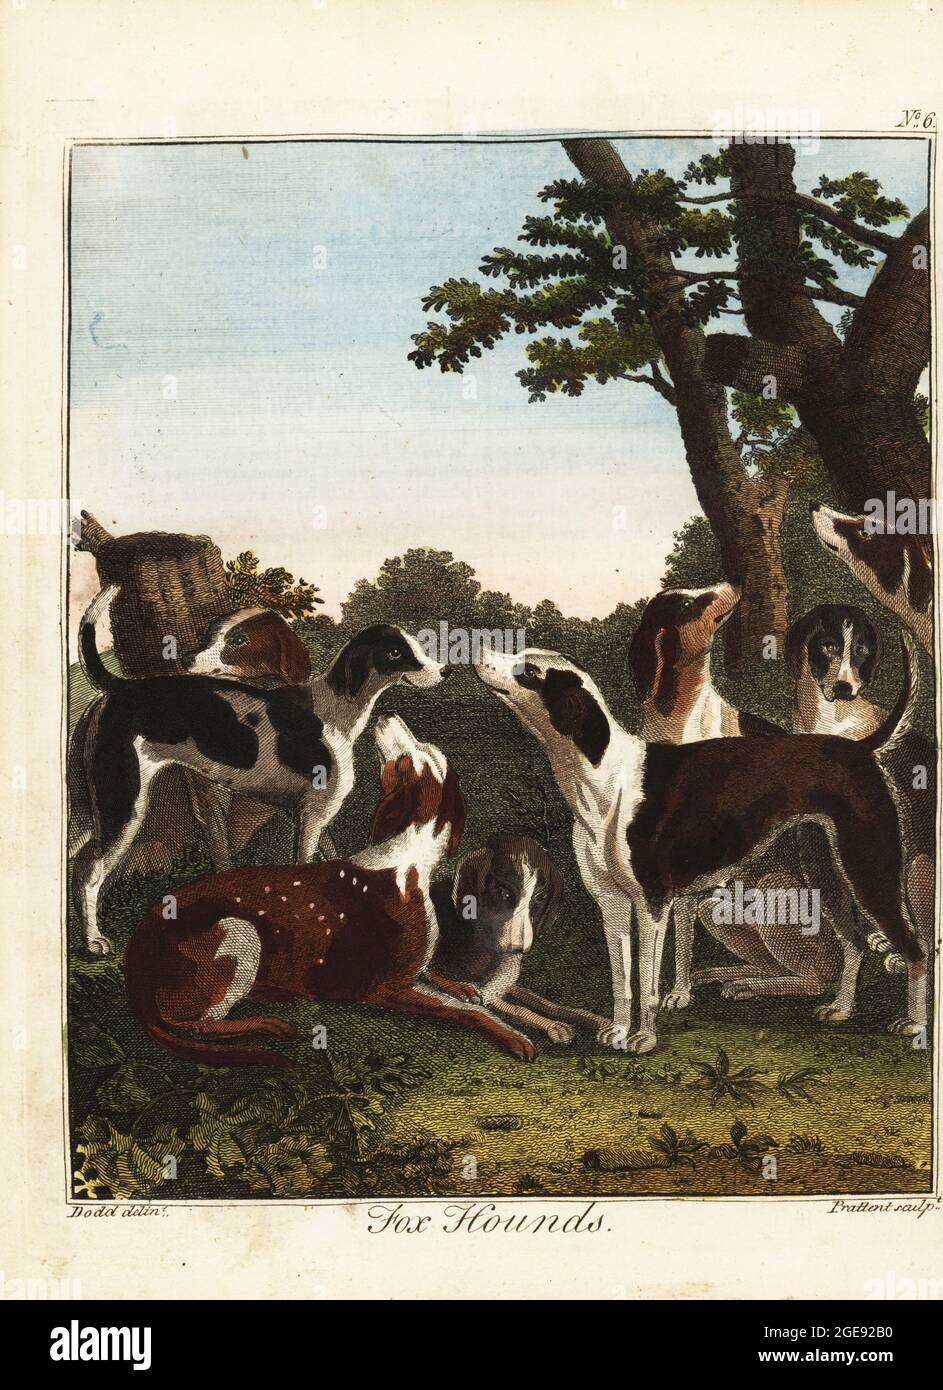 A pack of fox hounds before a hunt, 18th century. Handcoloured copperplate engraving by Thomas Prattent after an illustration by Daniel Dodd from William Augustus Osbaldiston’s The British Sportsman, or Nobleman, Gentleman and Farmer’s Dictionary of Recreation and Amusement, J. Stead, London, 1792. Stock Photo